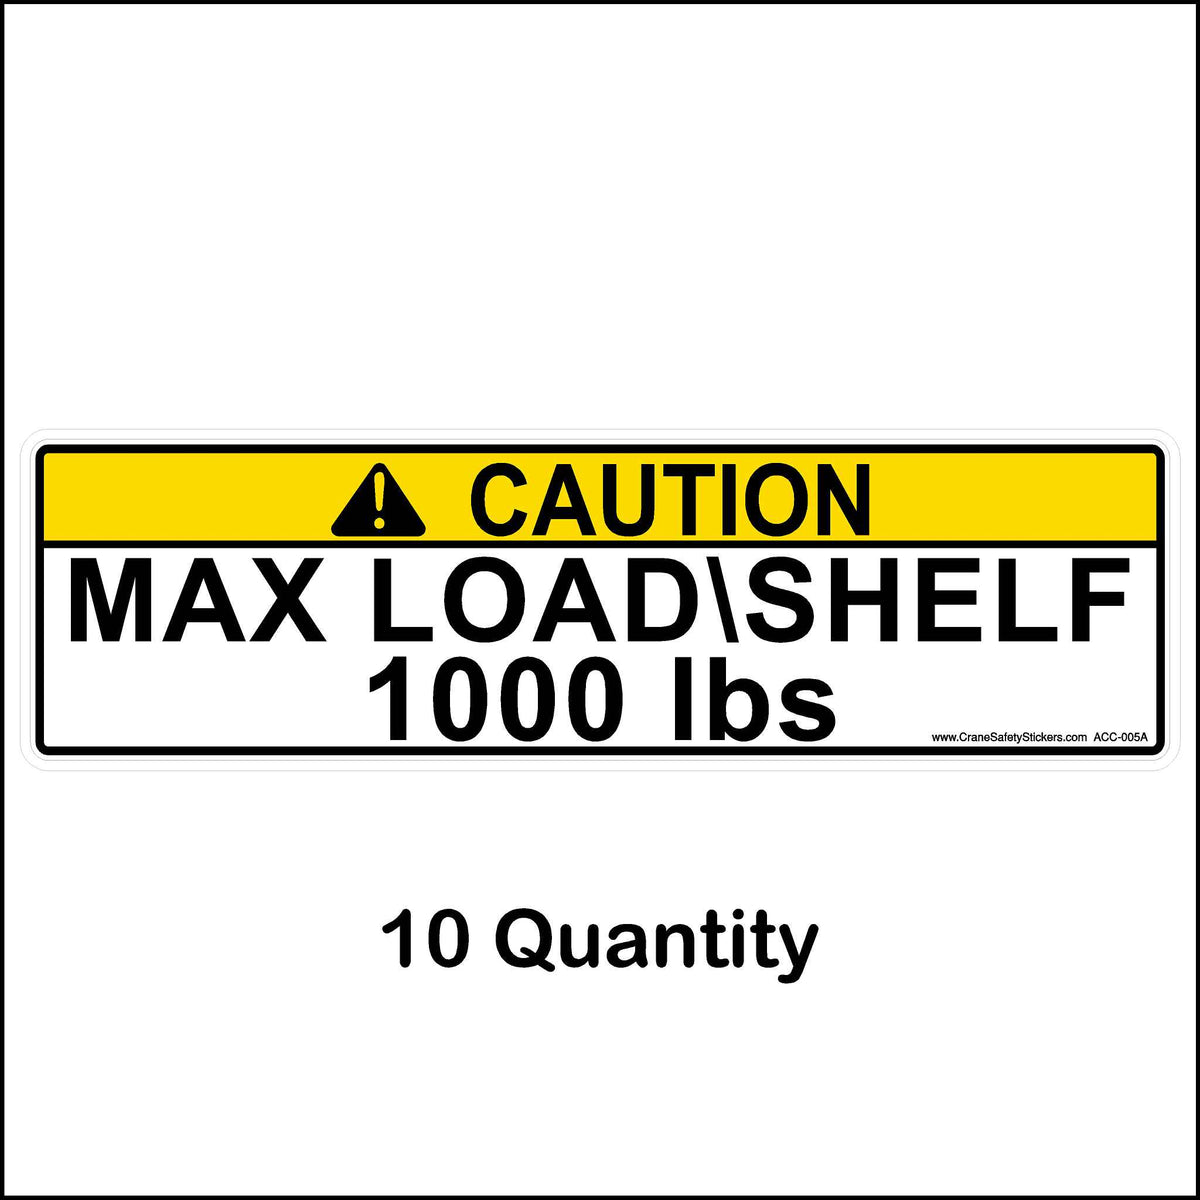 1000 lbs max load shelf Pallet Rack Weight Capacity Labels. 10 Quantity.